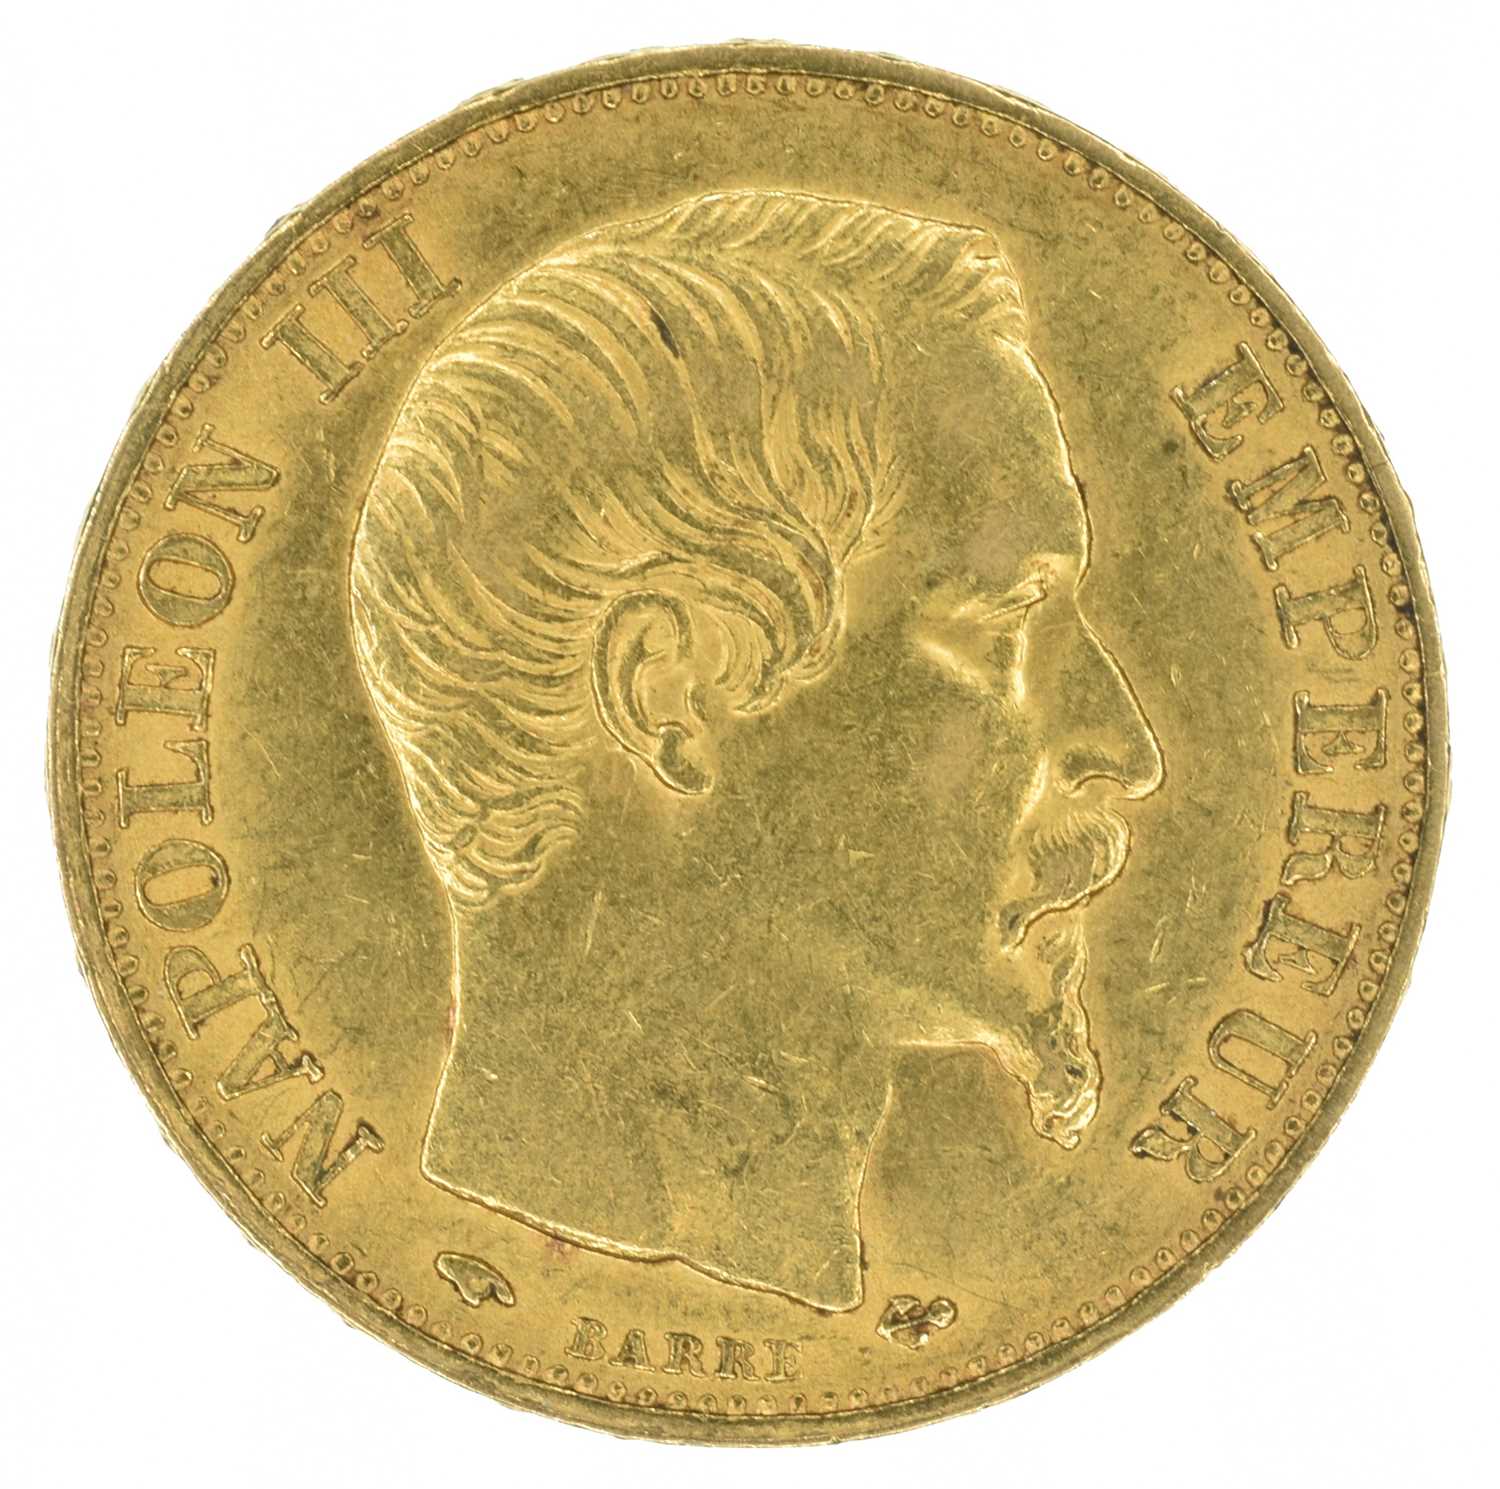 Lot 95 - France, President Napoleon III, 20 Francs, 1859, gold, weight 6.5g, VF.